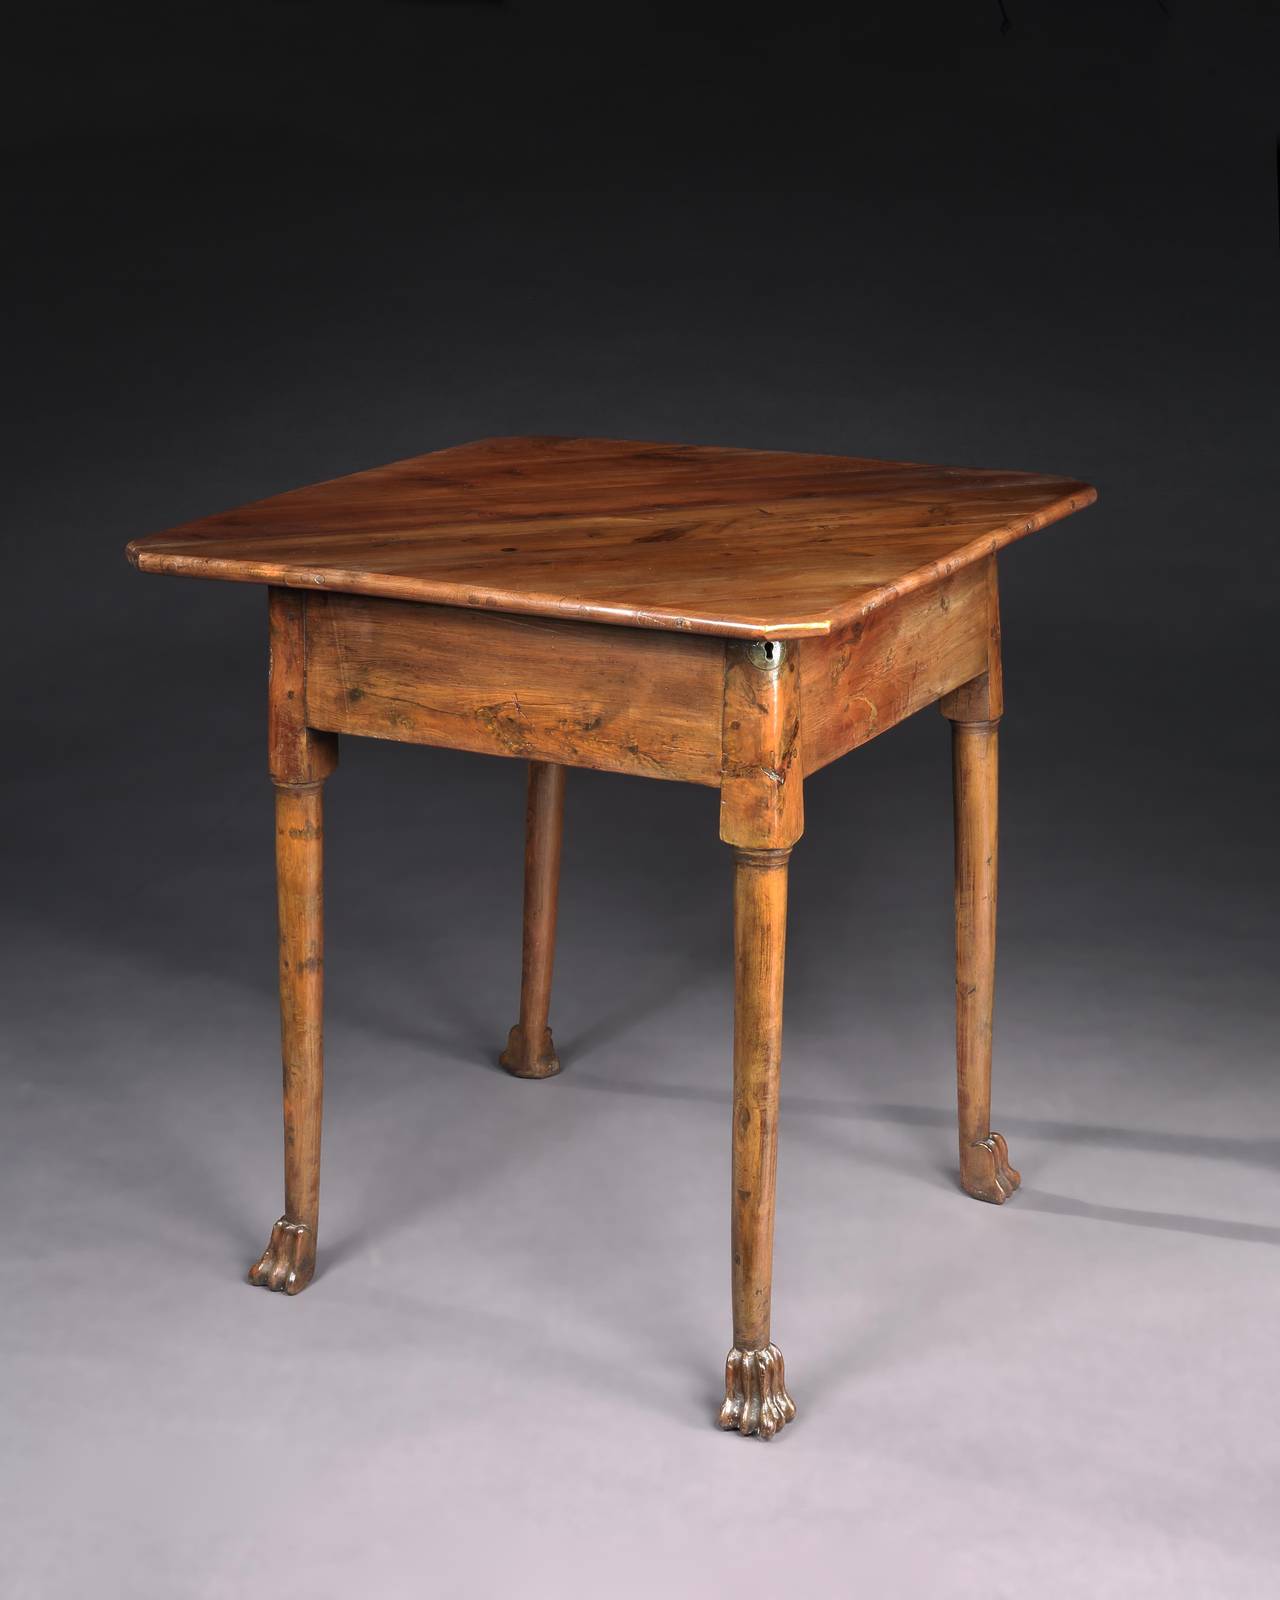 Rare Small “Triangular” Folding Gate Leg Table
With Exceptional Carved Paw Feet
Solid Honey Coloured Yew Wood
Probably Irish, c.1750